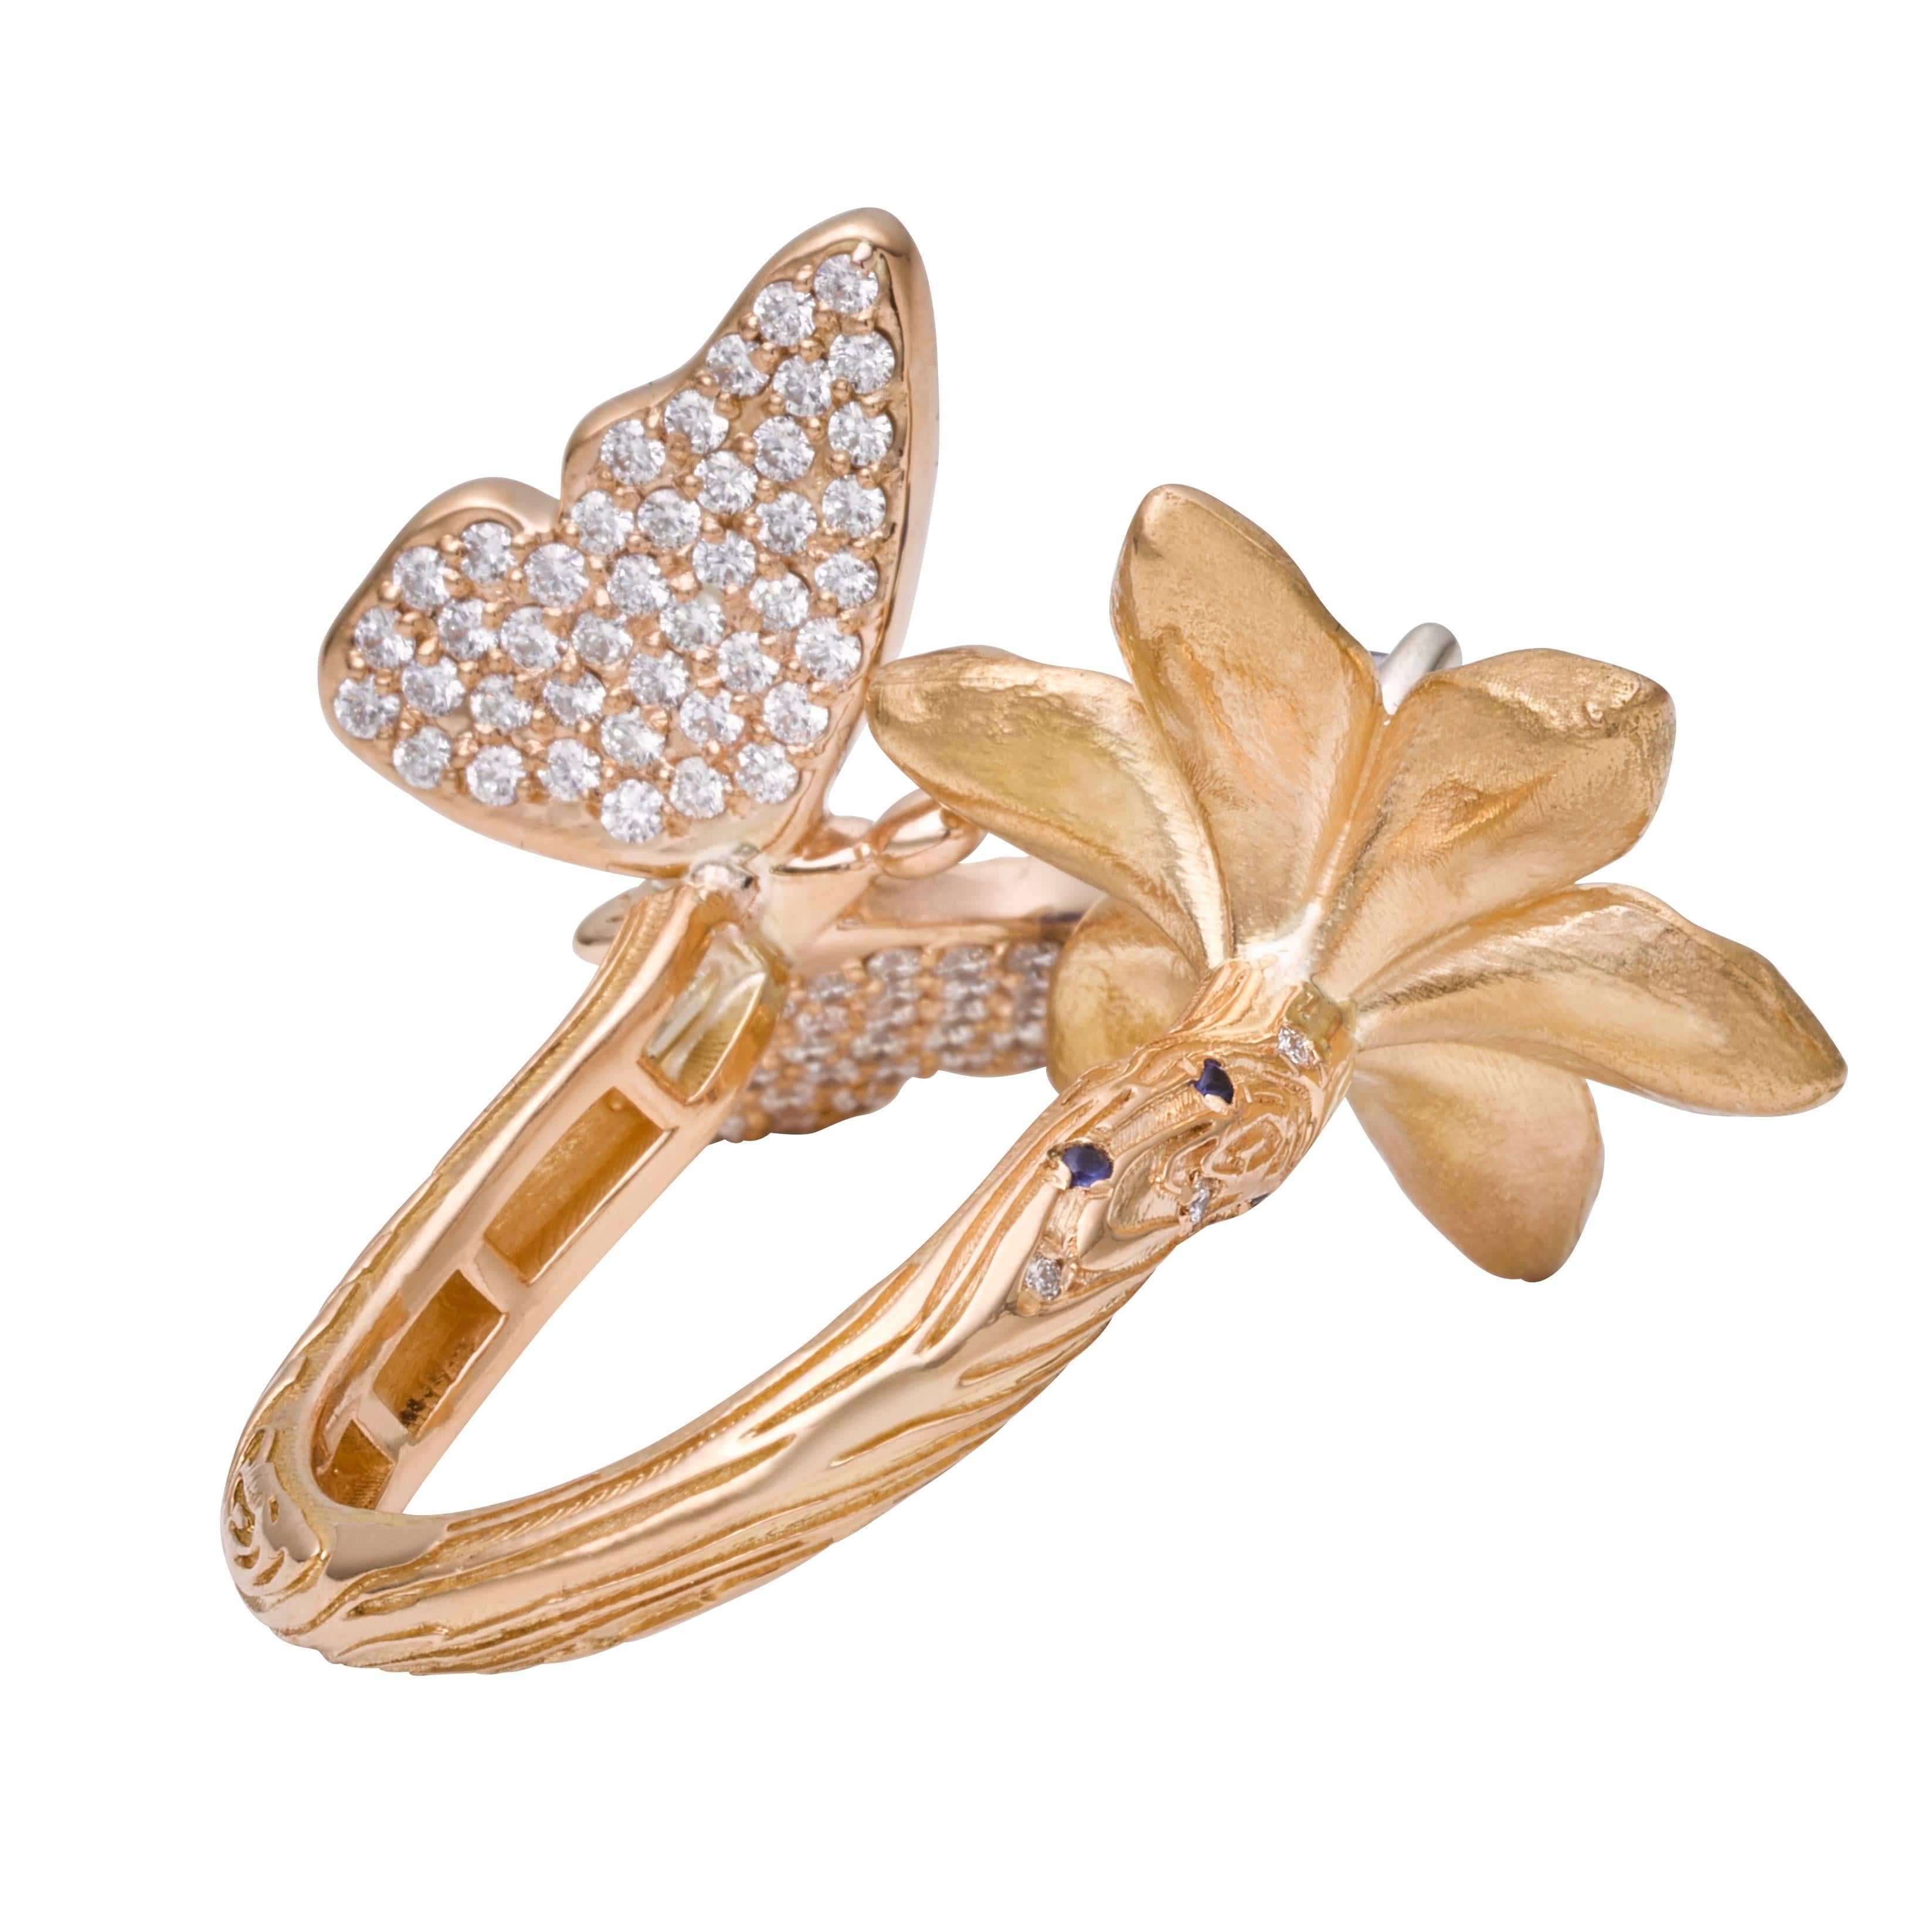 A one of a kind piece, the Petal Butterfly Ring is inspired by the circle of life that exists within nature. The flower is set with a sparkling center stone and accented by white diamonds and sapphires mounted in 20k rose gold.

1.07ct blue